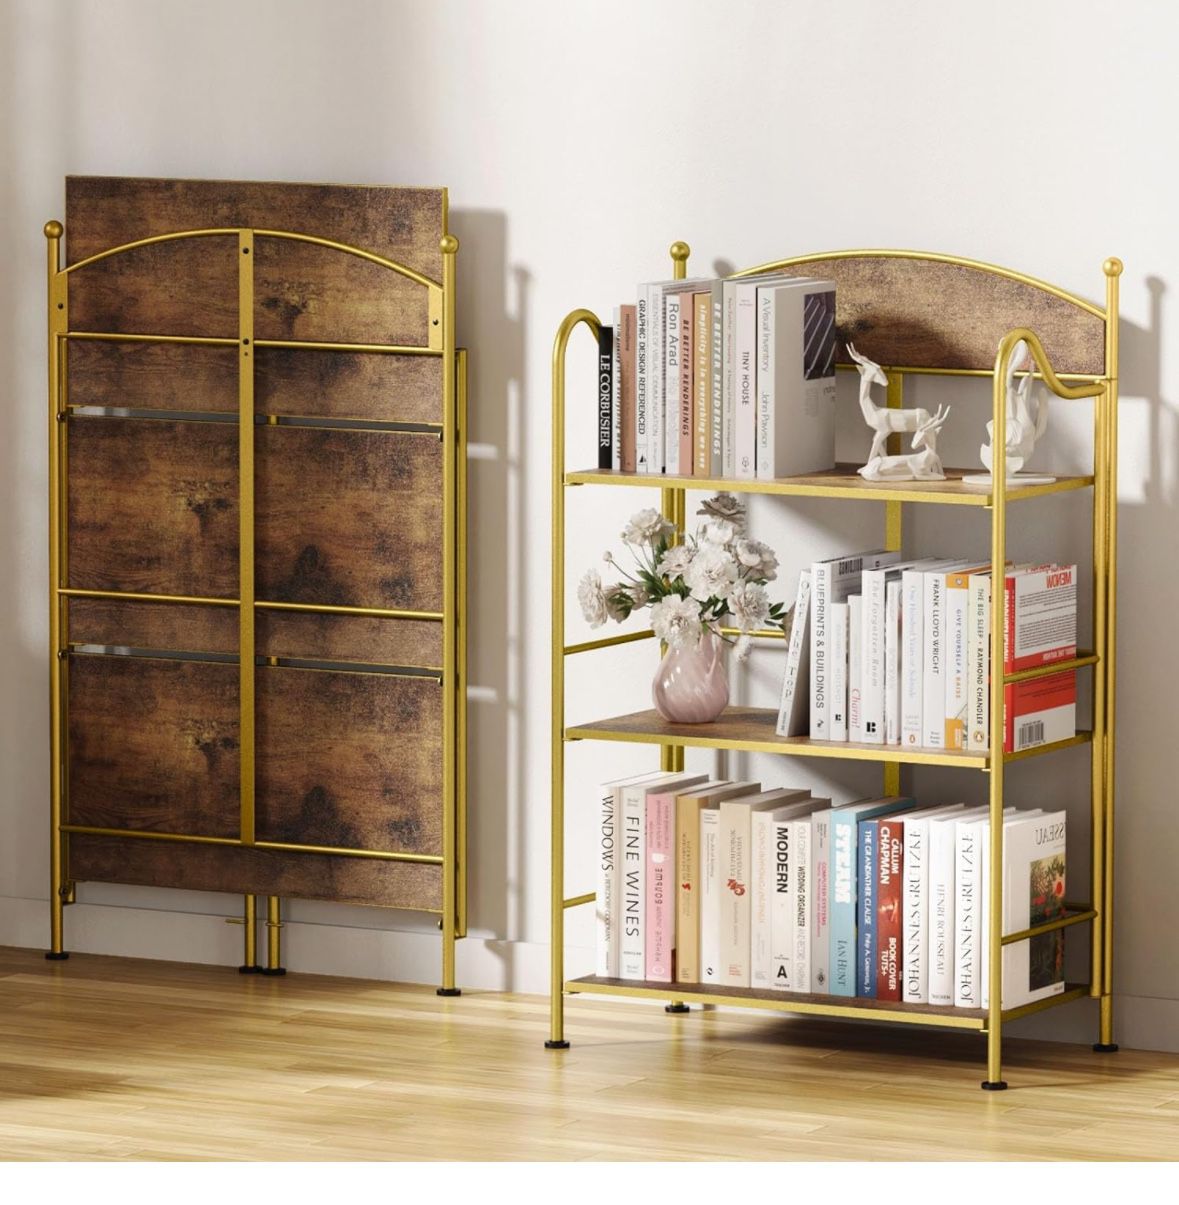 ALLSTAND Folding Bookshelf No Assembly, 3 Shelf Gold Folding Bookcase,Industrial Small Metal Corner Display Book Shelf with Storage Shelves for Bedroo